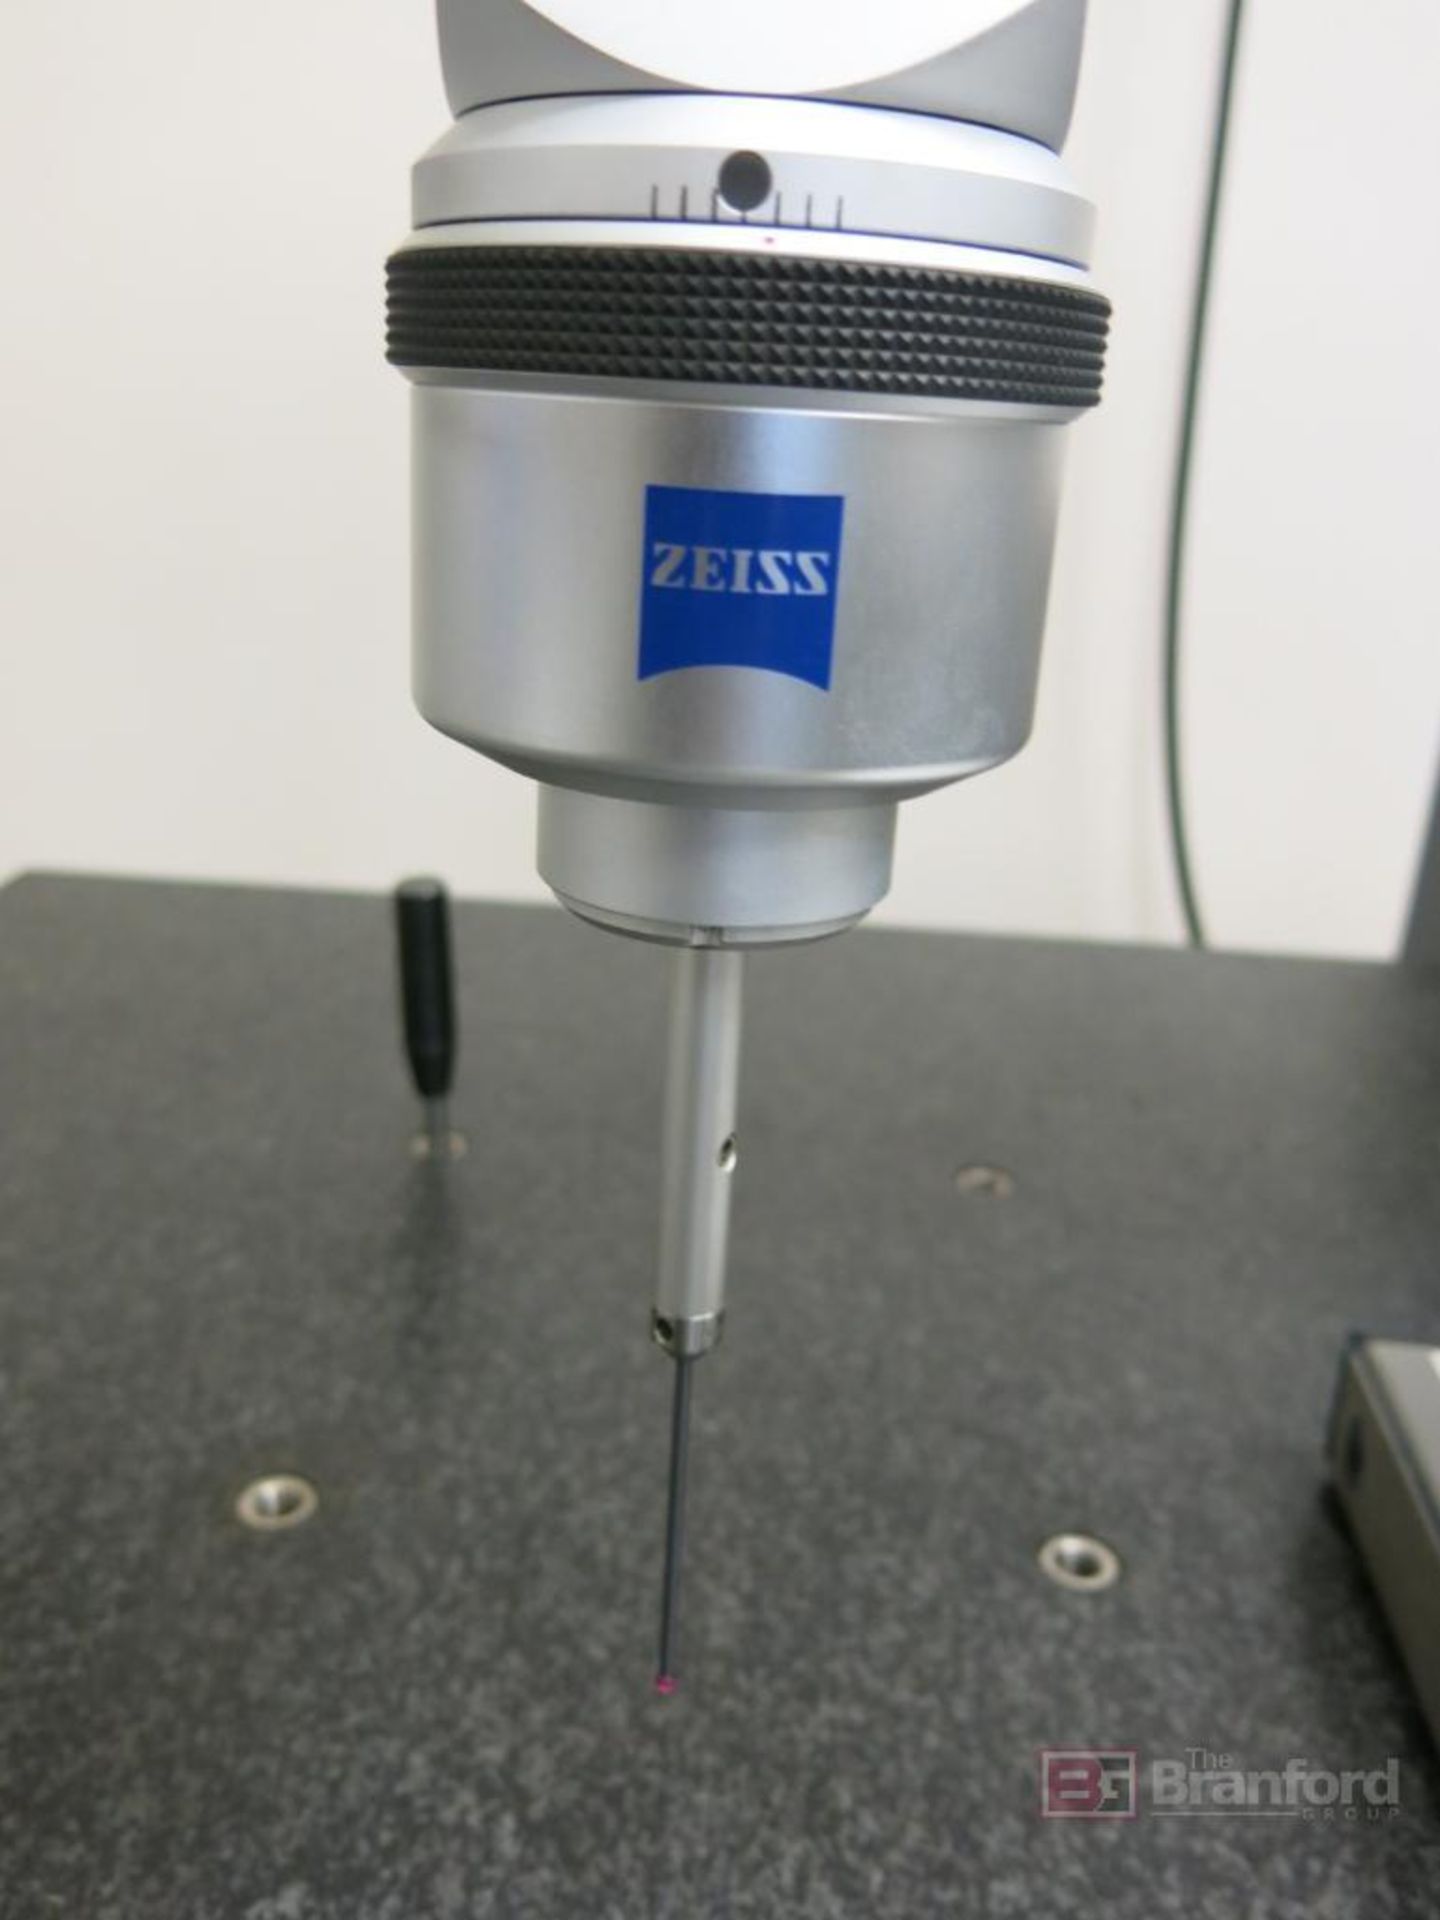 Zeiss Eclipse Model SYS: EC, 550 DOC, TS, 099/II Coordinate Measuring Machine - Image 5 of 8